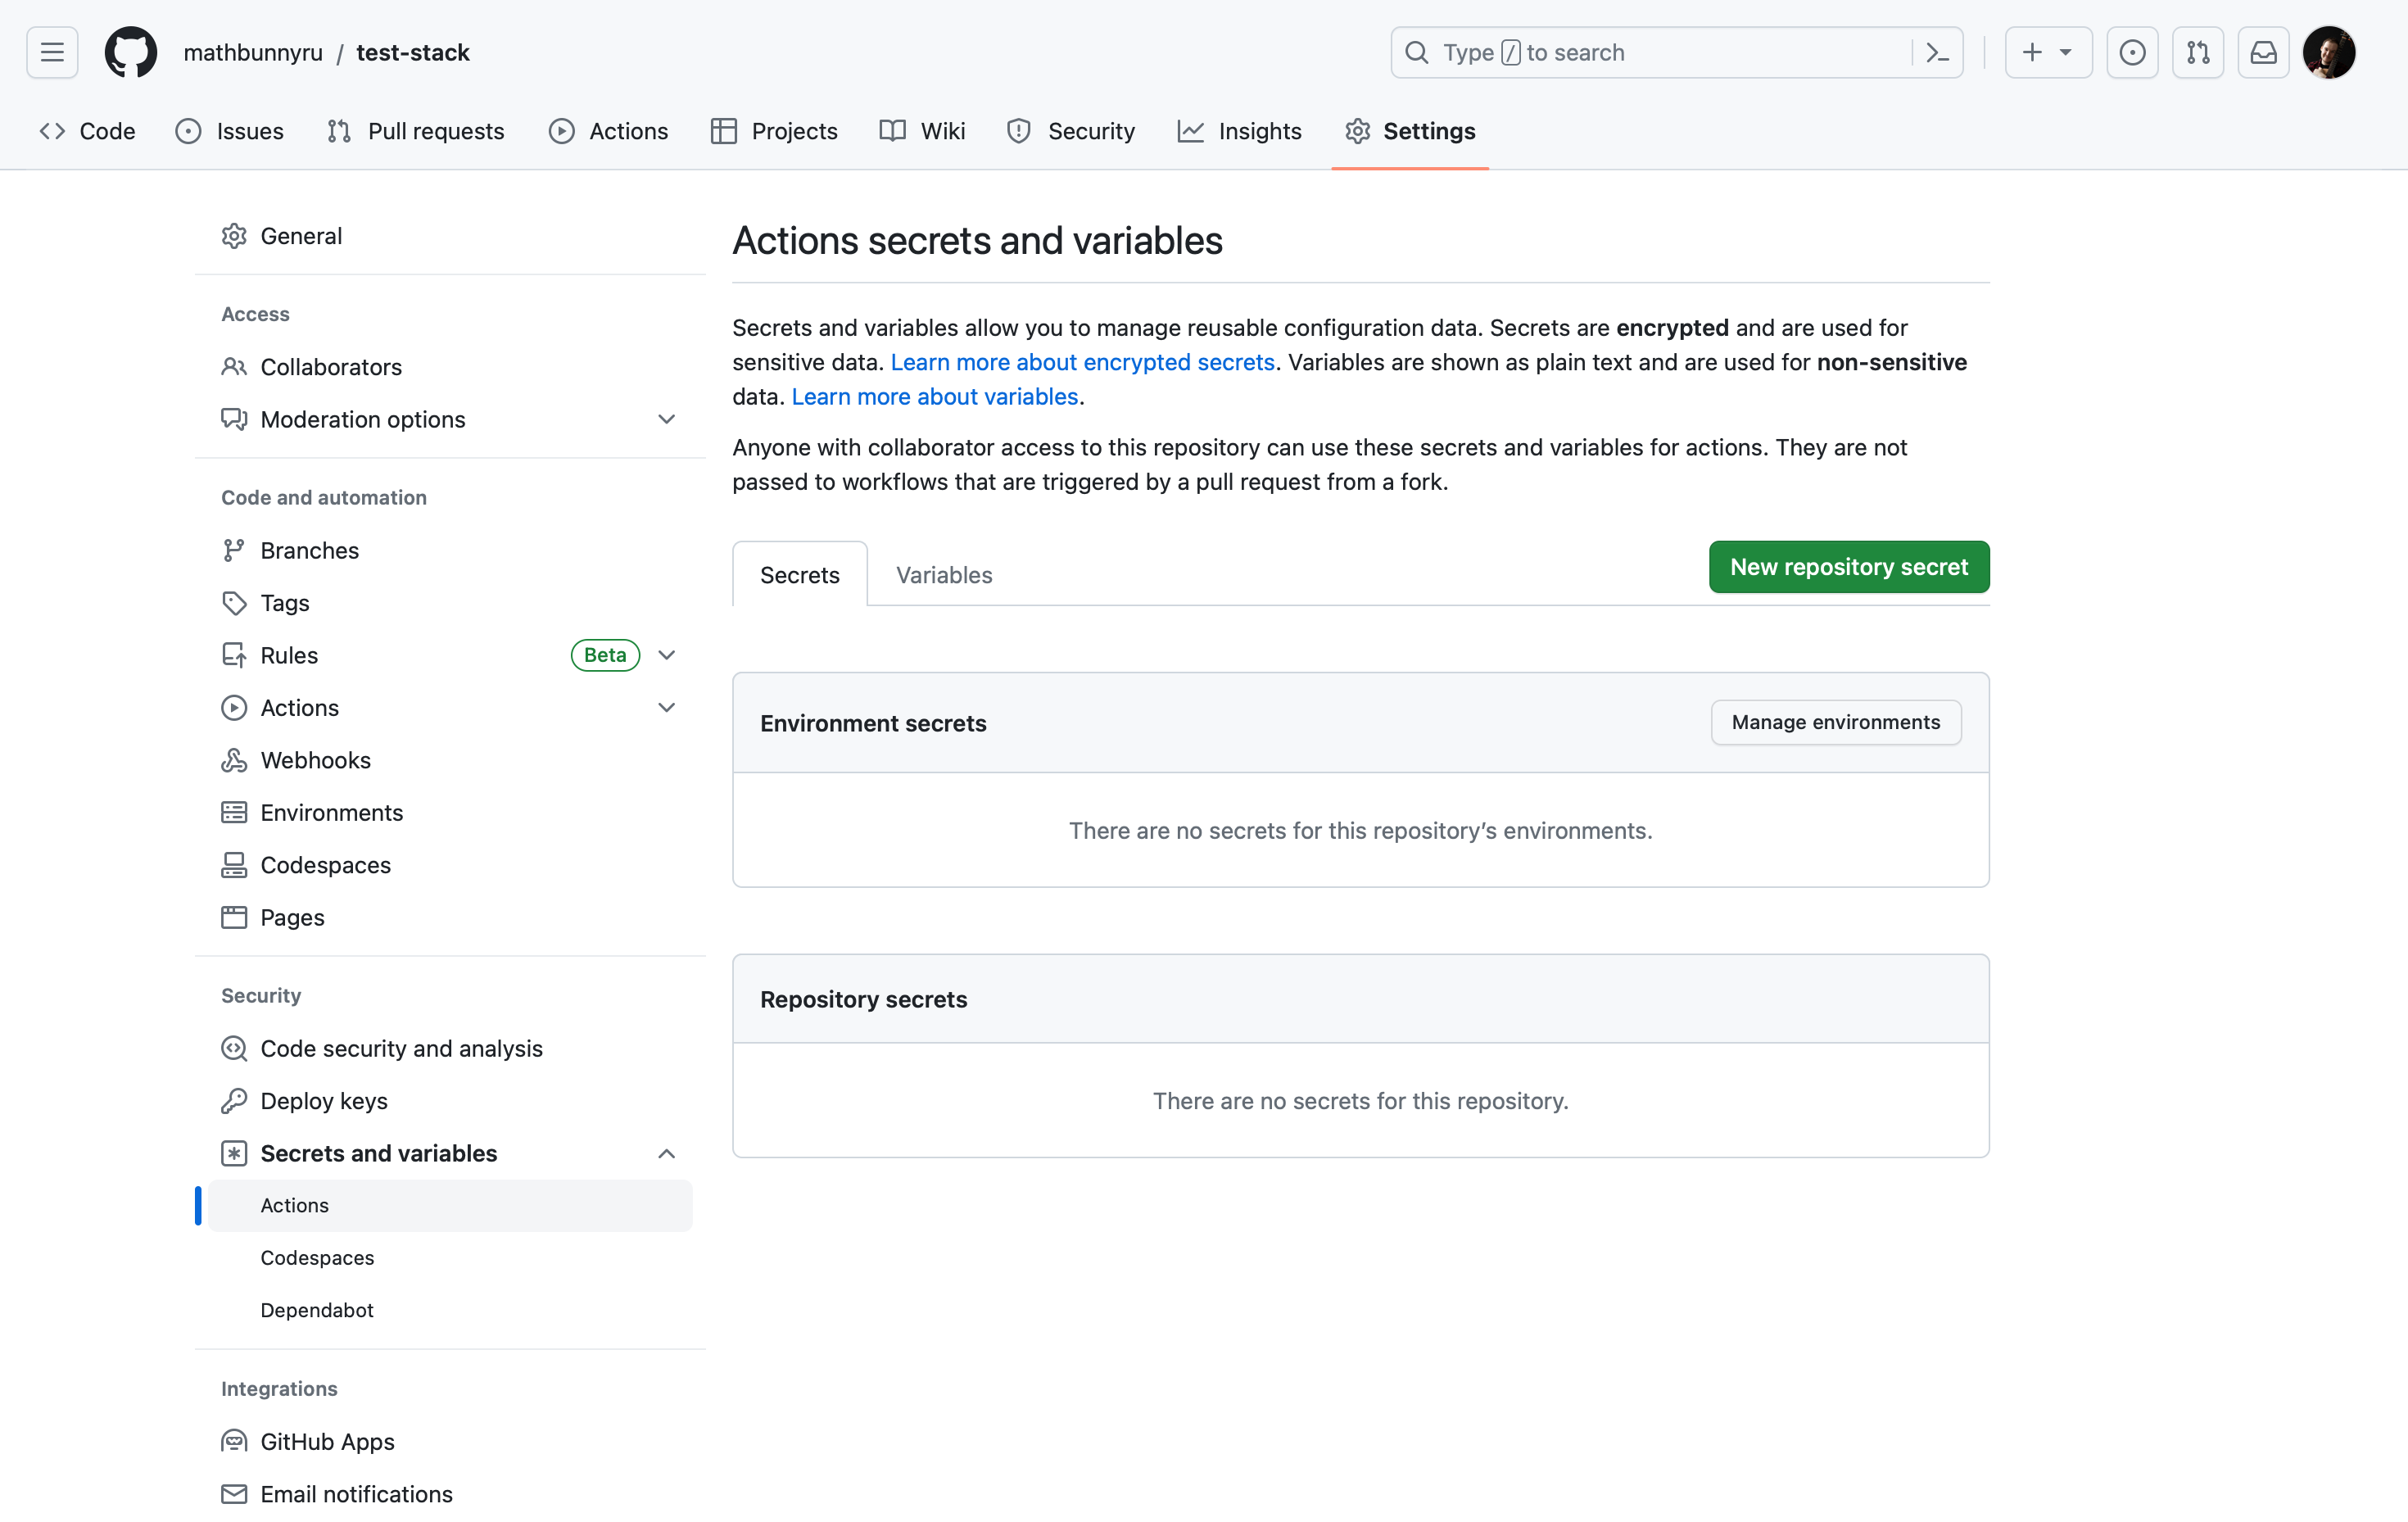 GitHub page with the "Setting" tab active and a rectangle highlighting the "New repository secret" button in the UI